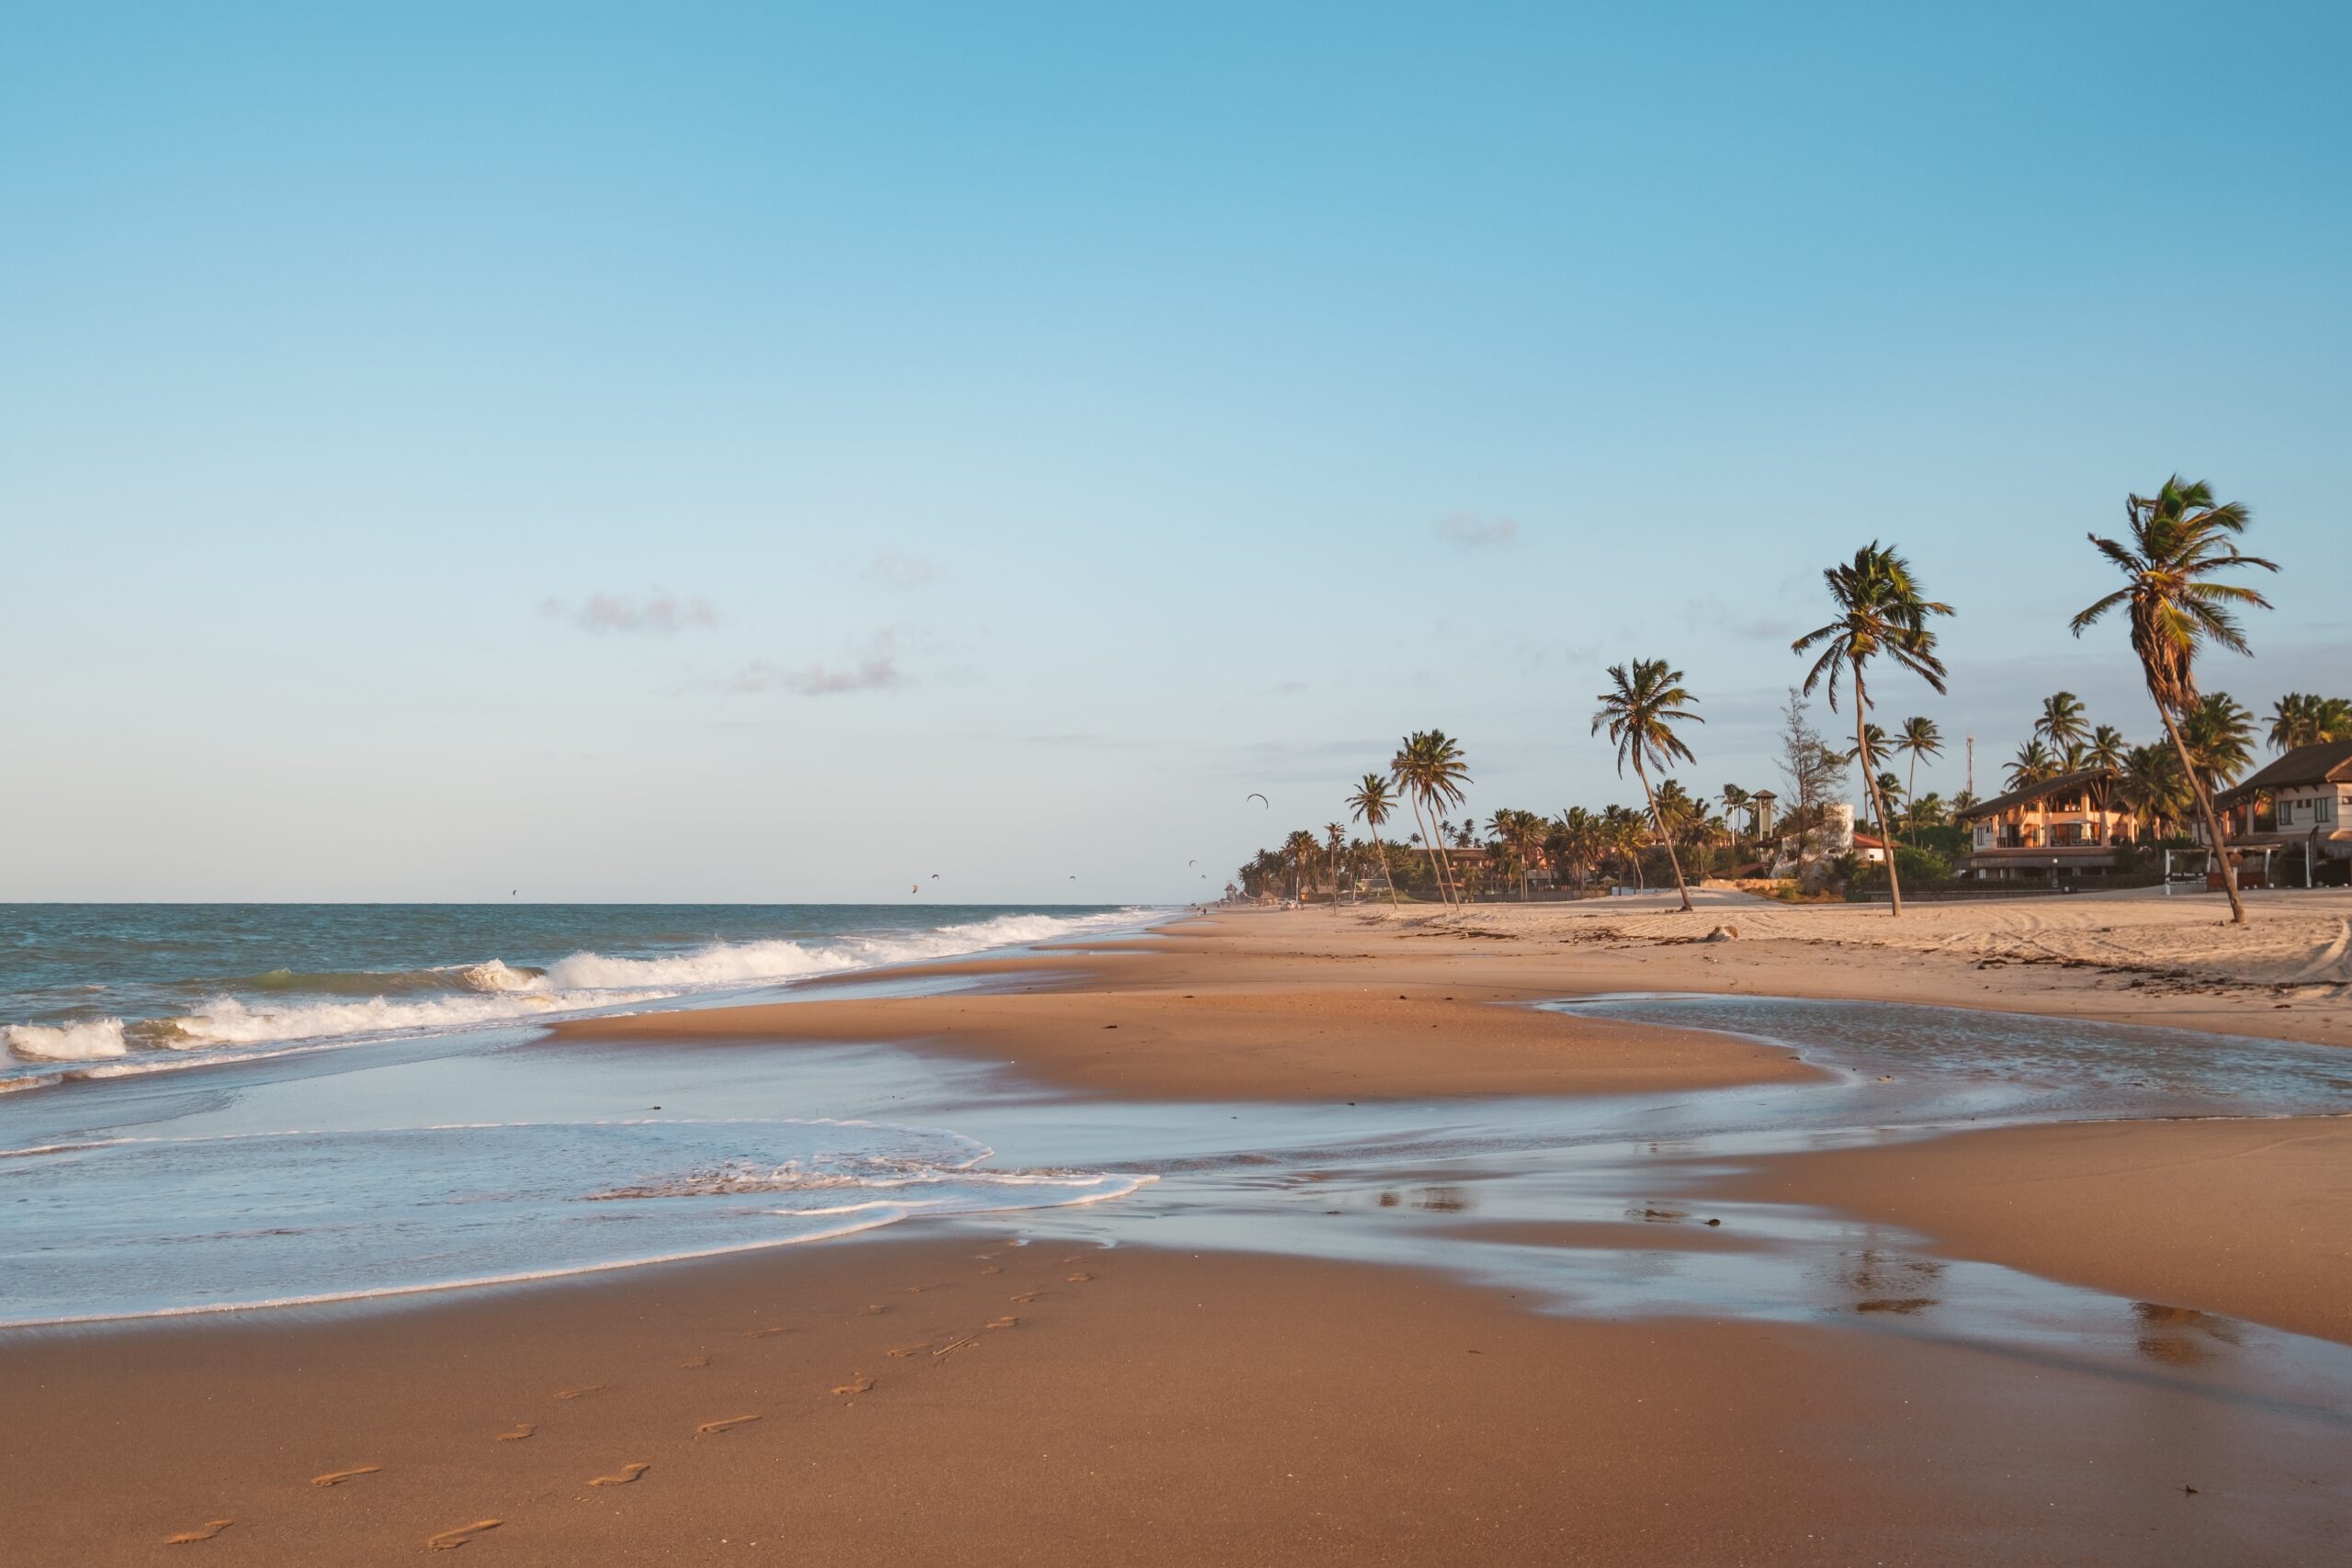 Beautiful View Of Palm Trees On The Beach In Northern Brazil, Ceara, Fortaleza/cumbuco/parnaiba